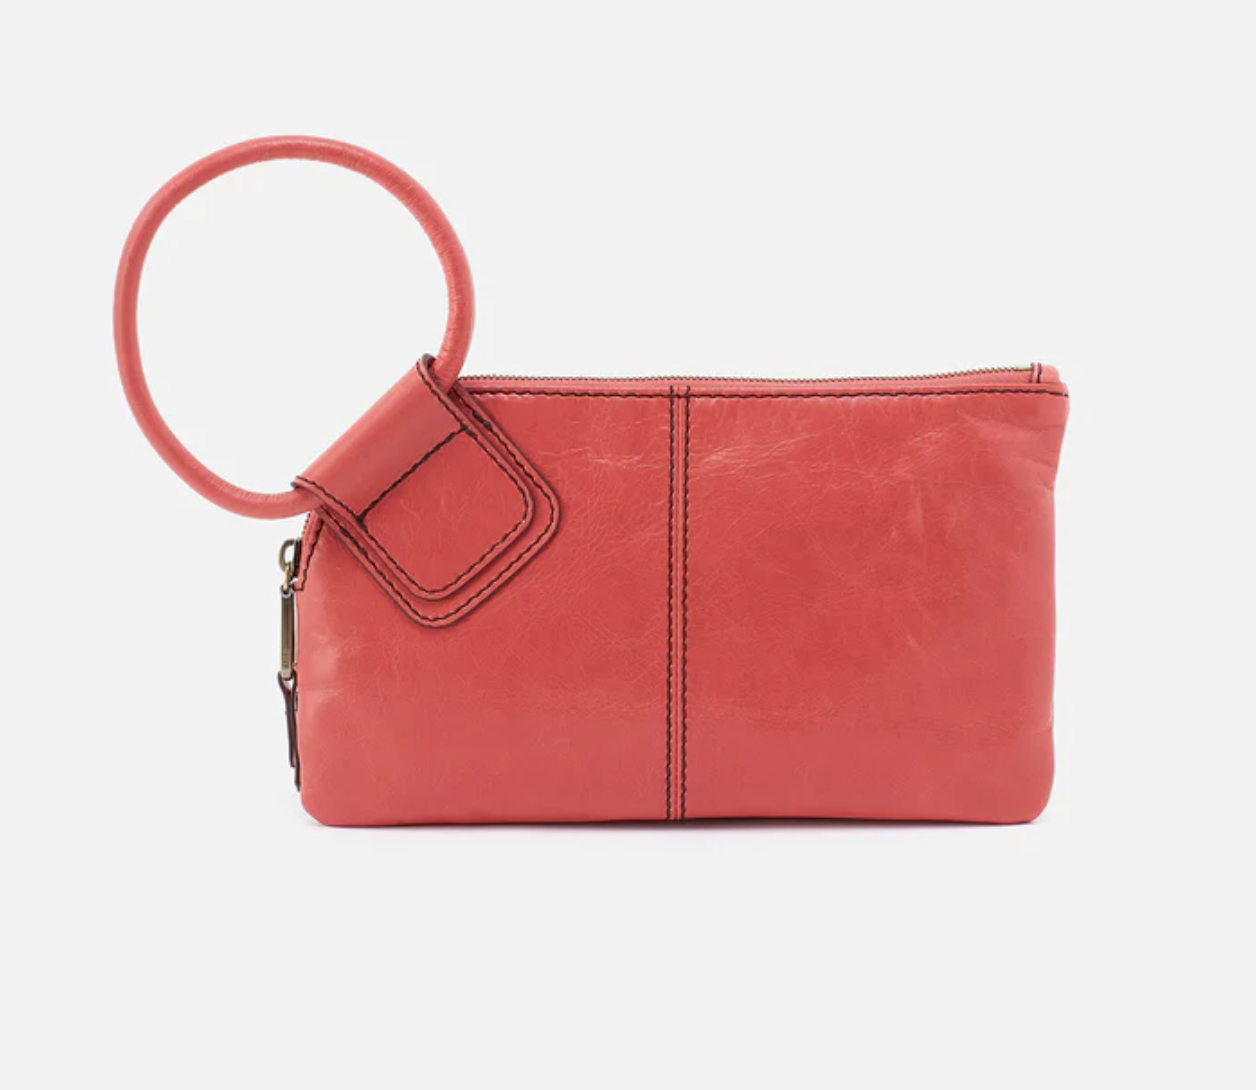 Sable Wristlet by HOBO in Cherry Blossom - The Street Boutique 